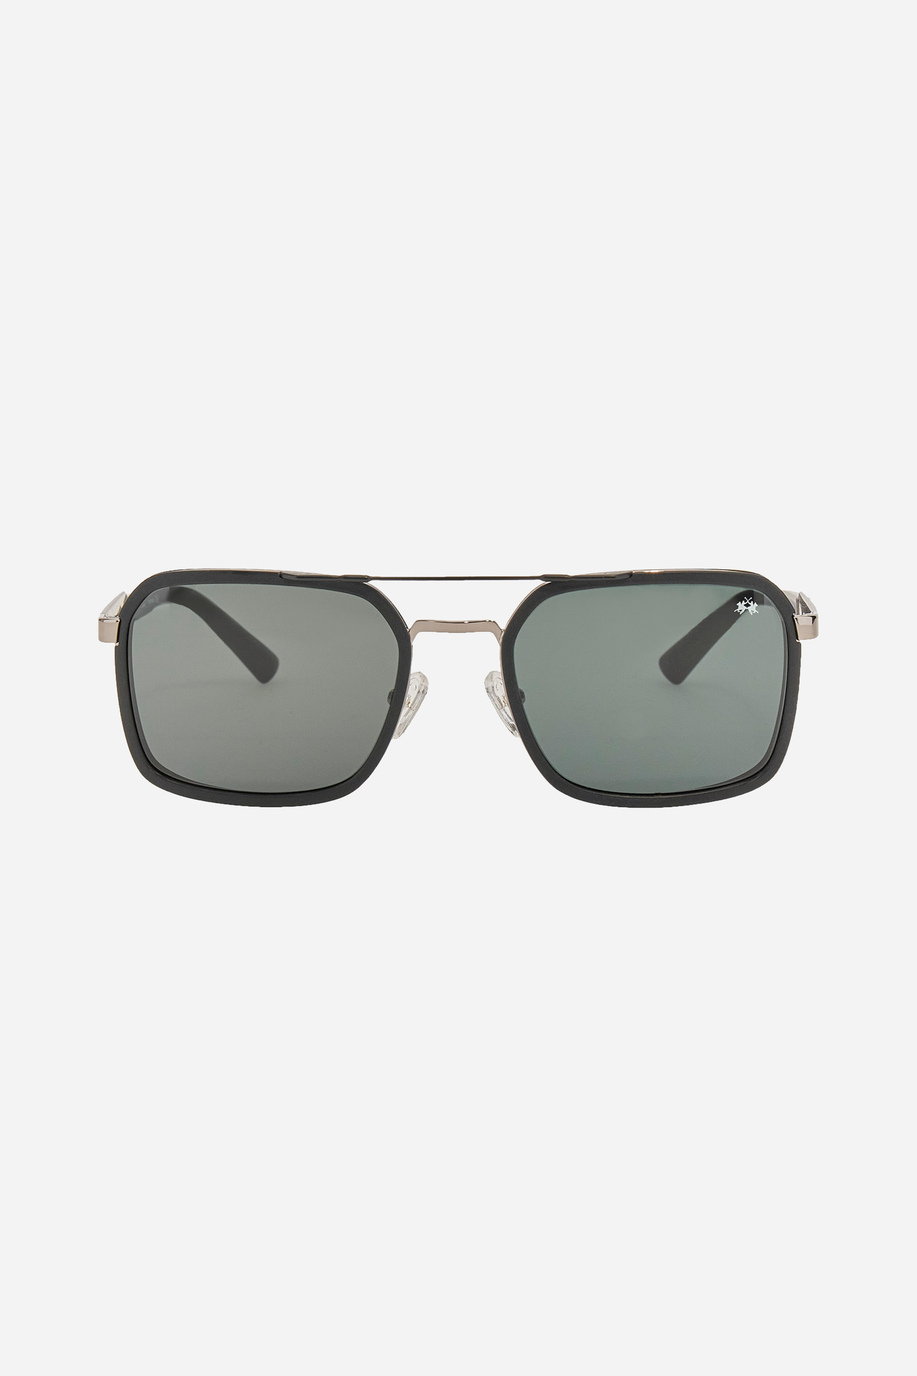 Trapeze sunglasses - Small gifts for him | La Martina - Official Online Shop